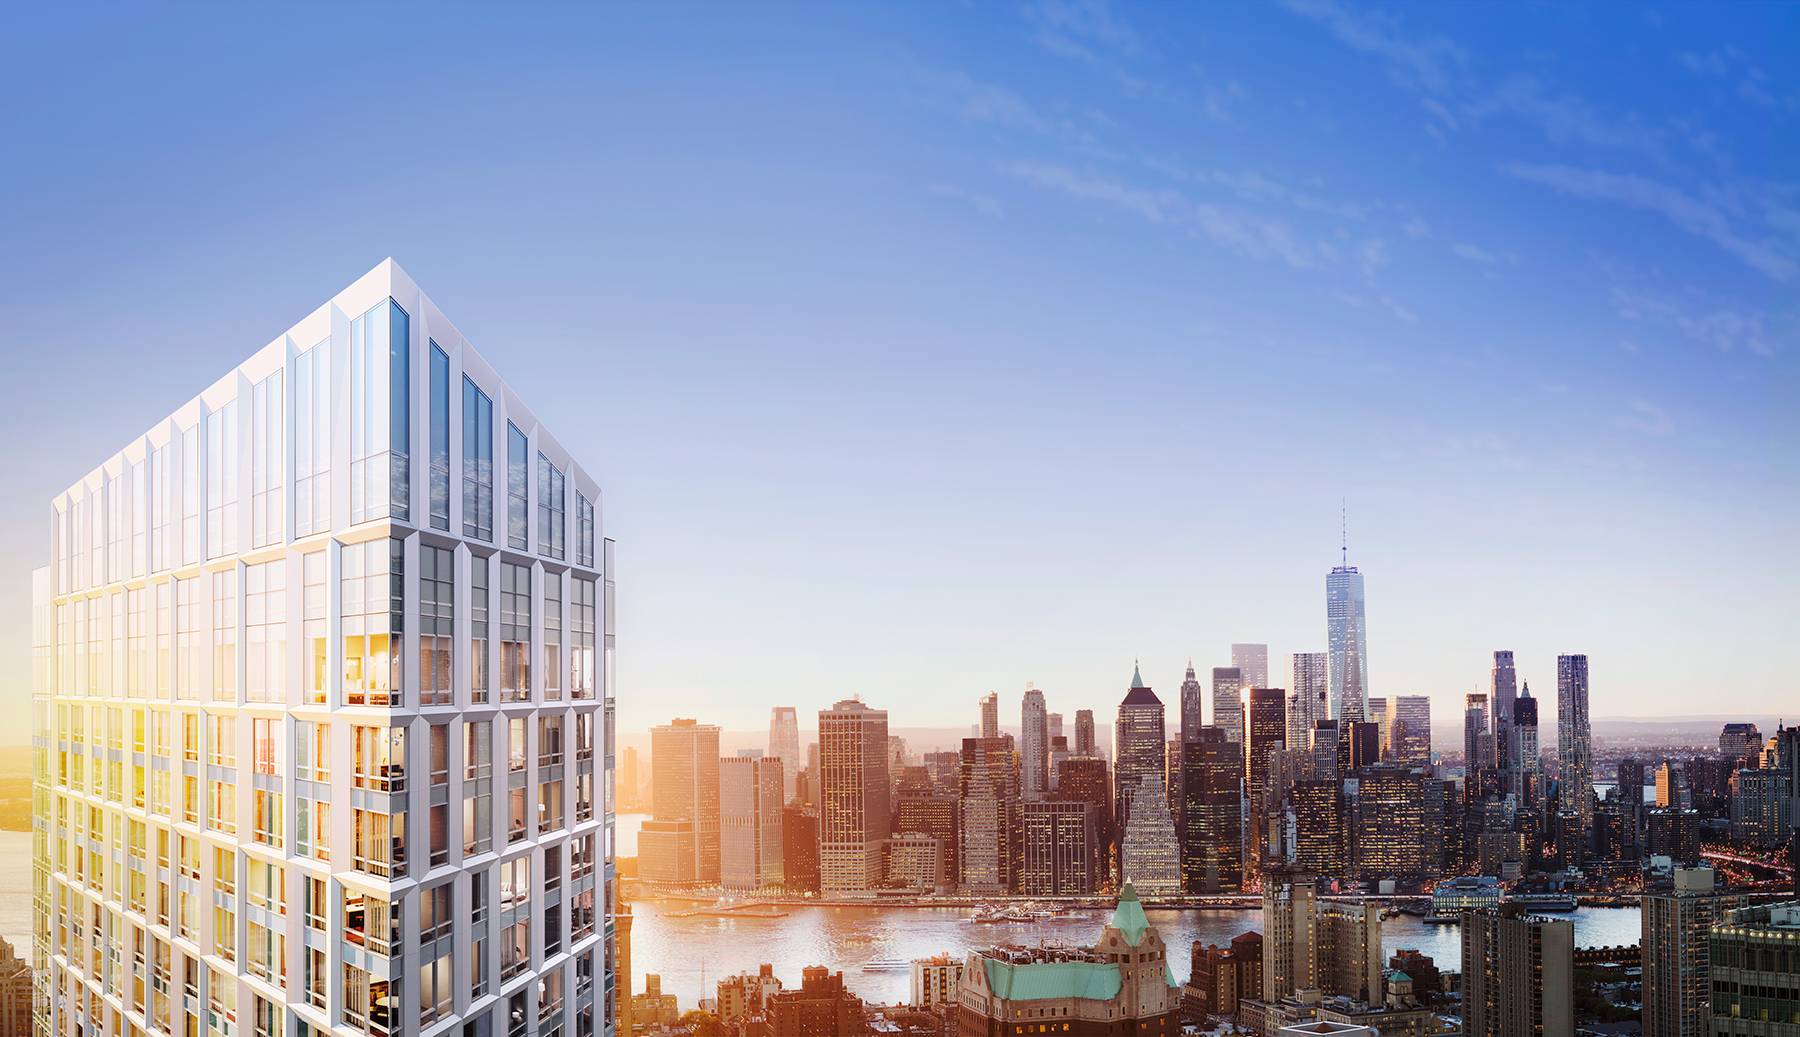 BROOKLYN POINT OFFERS ONE OF THE LAST 25 YEAR TAX ABATEMENTS AVAILABLE IN NEW YORK CITYExtell Development Company presents Brooklyn Point, a new standard of luxury living in Downtown Brooklyn.